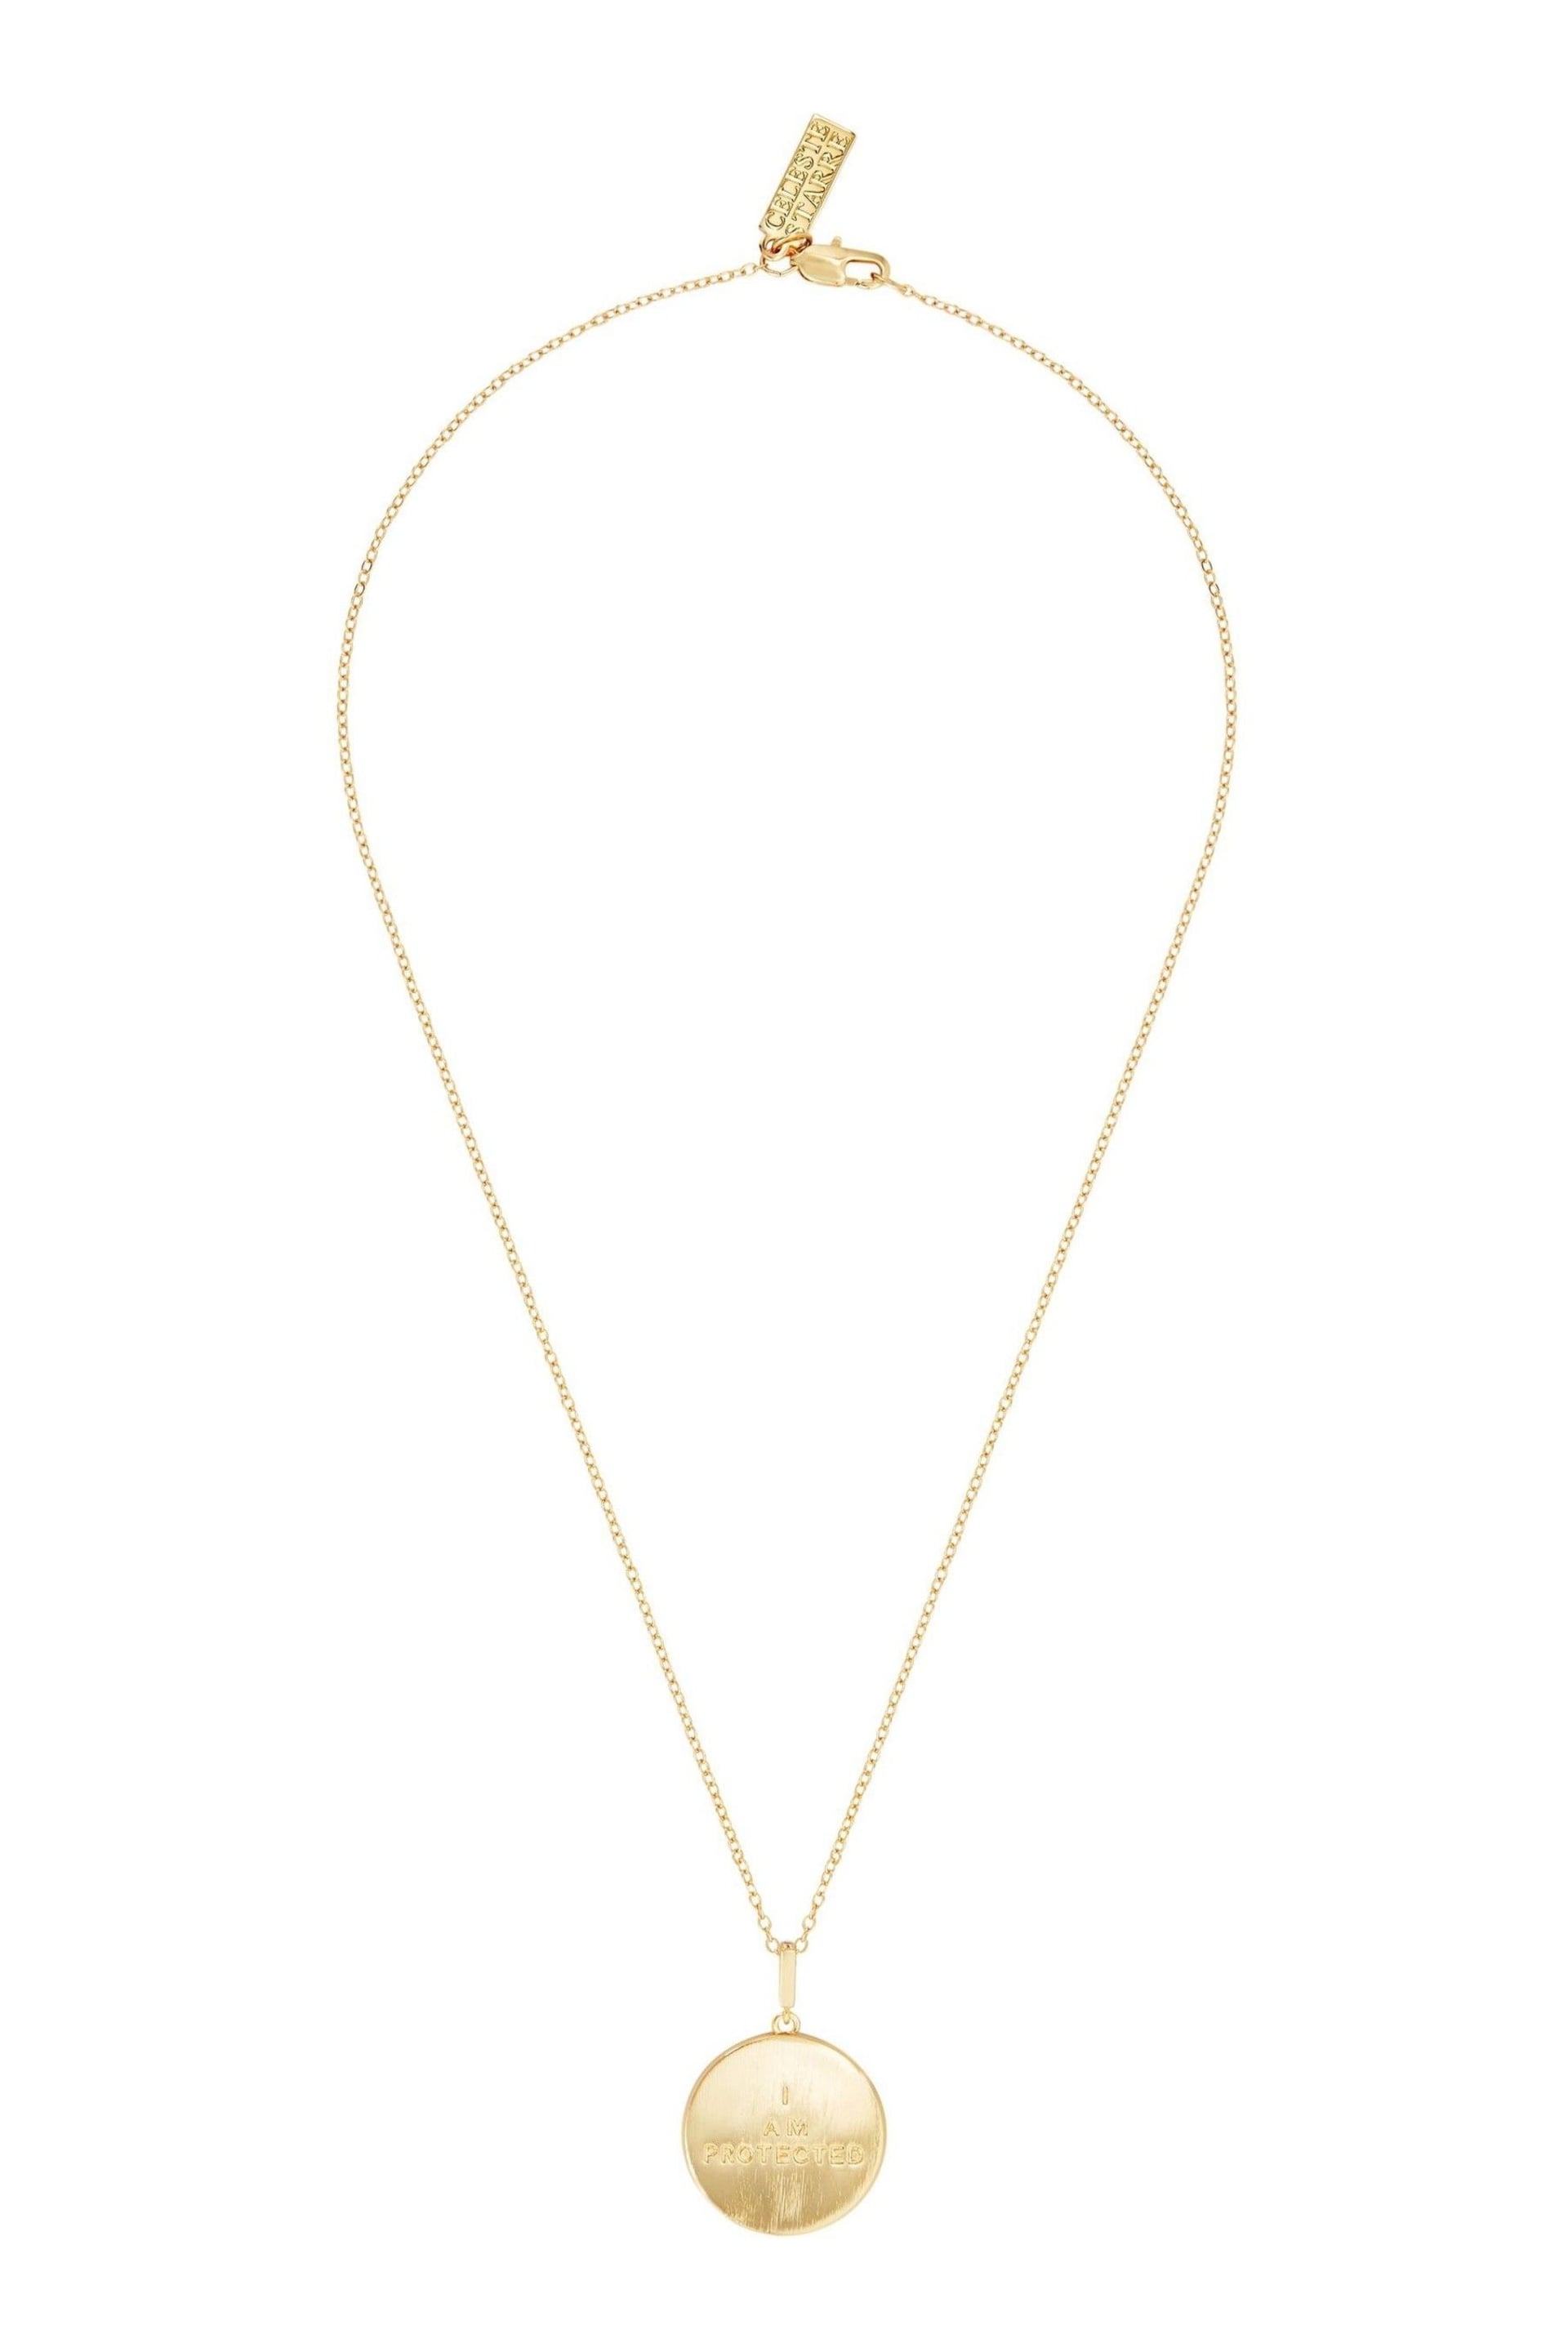 Celeste Starre Gold Tone I Am Protected Necklace - Mykonos Edition - Image 2 of 4